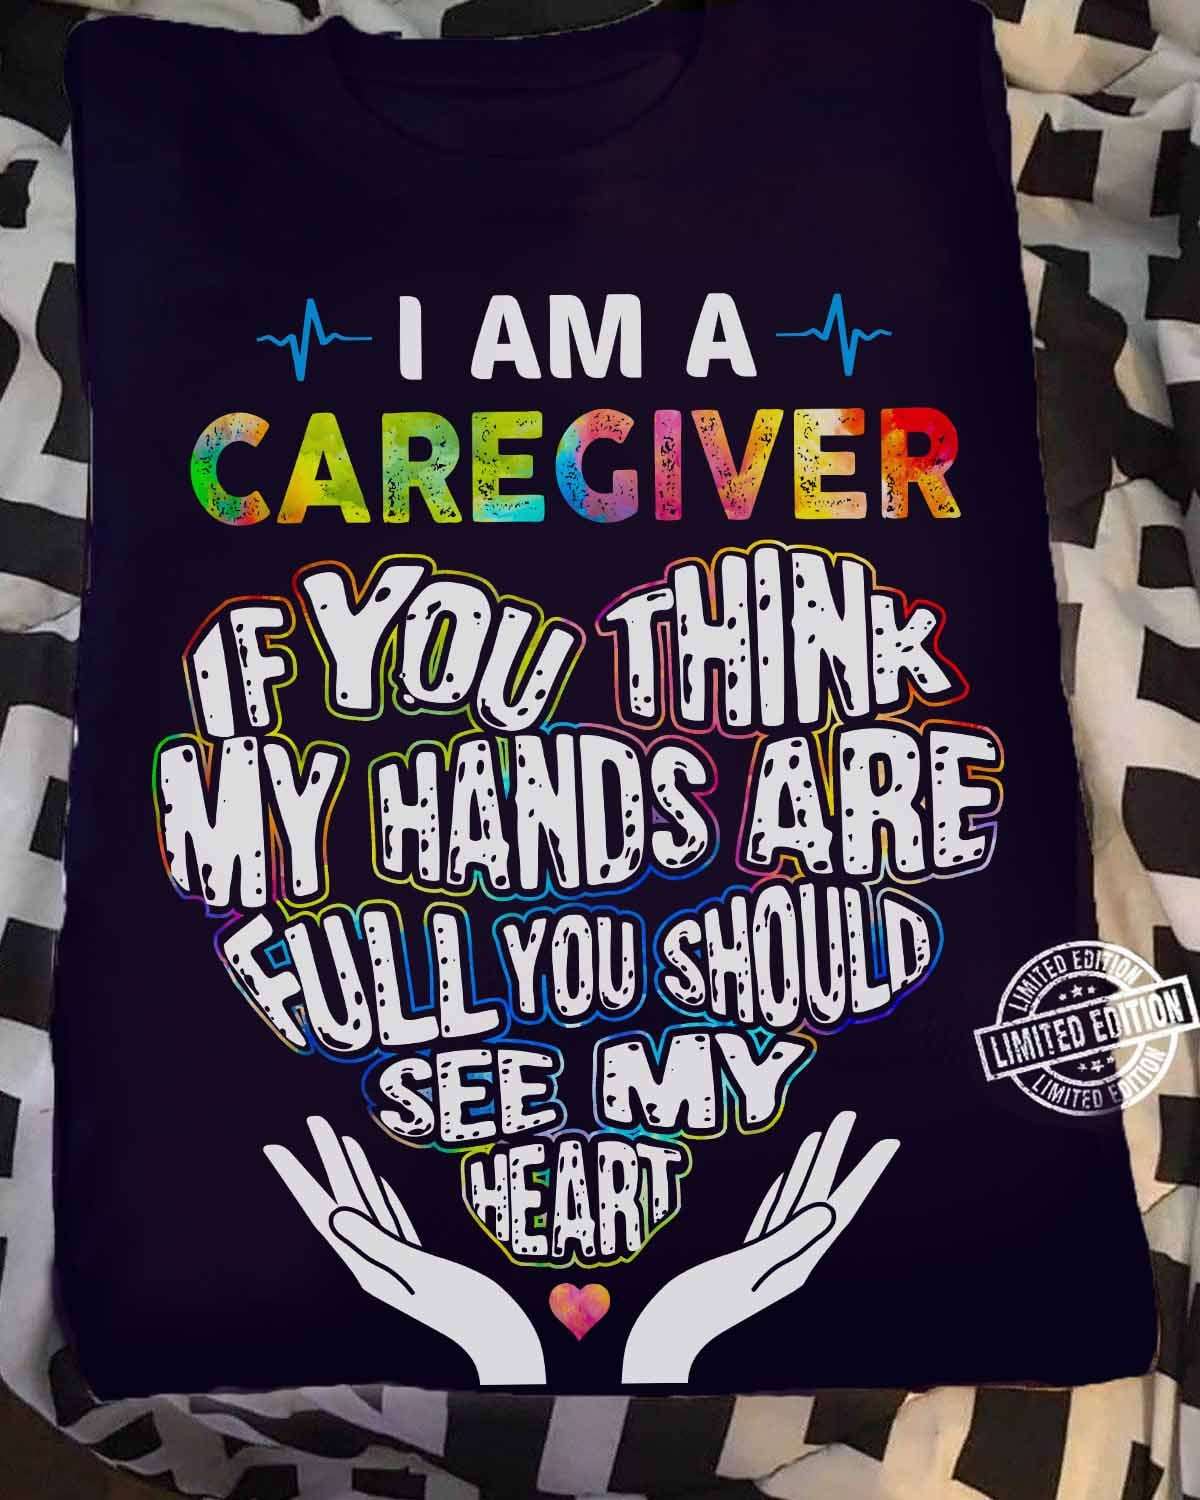 I am a caregiver if you think my hands are full you should see my heart - Caregiver the job